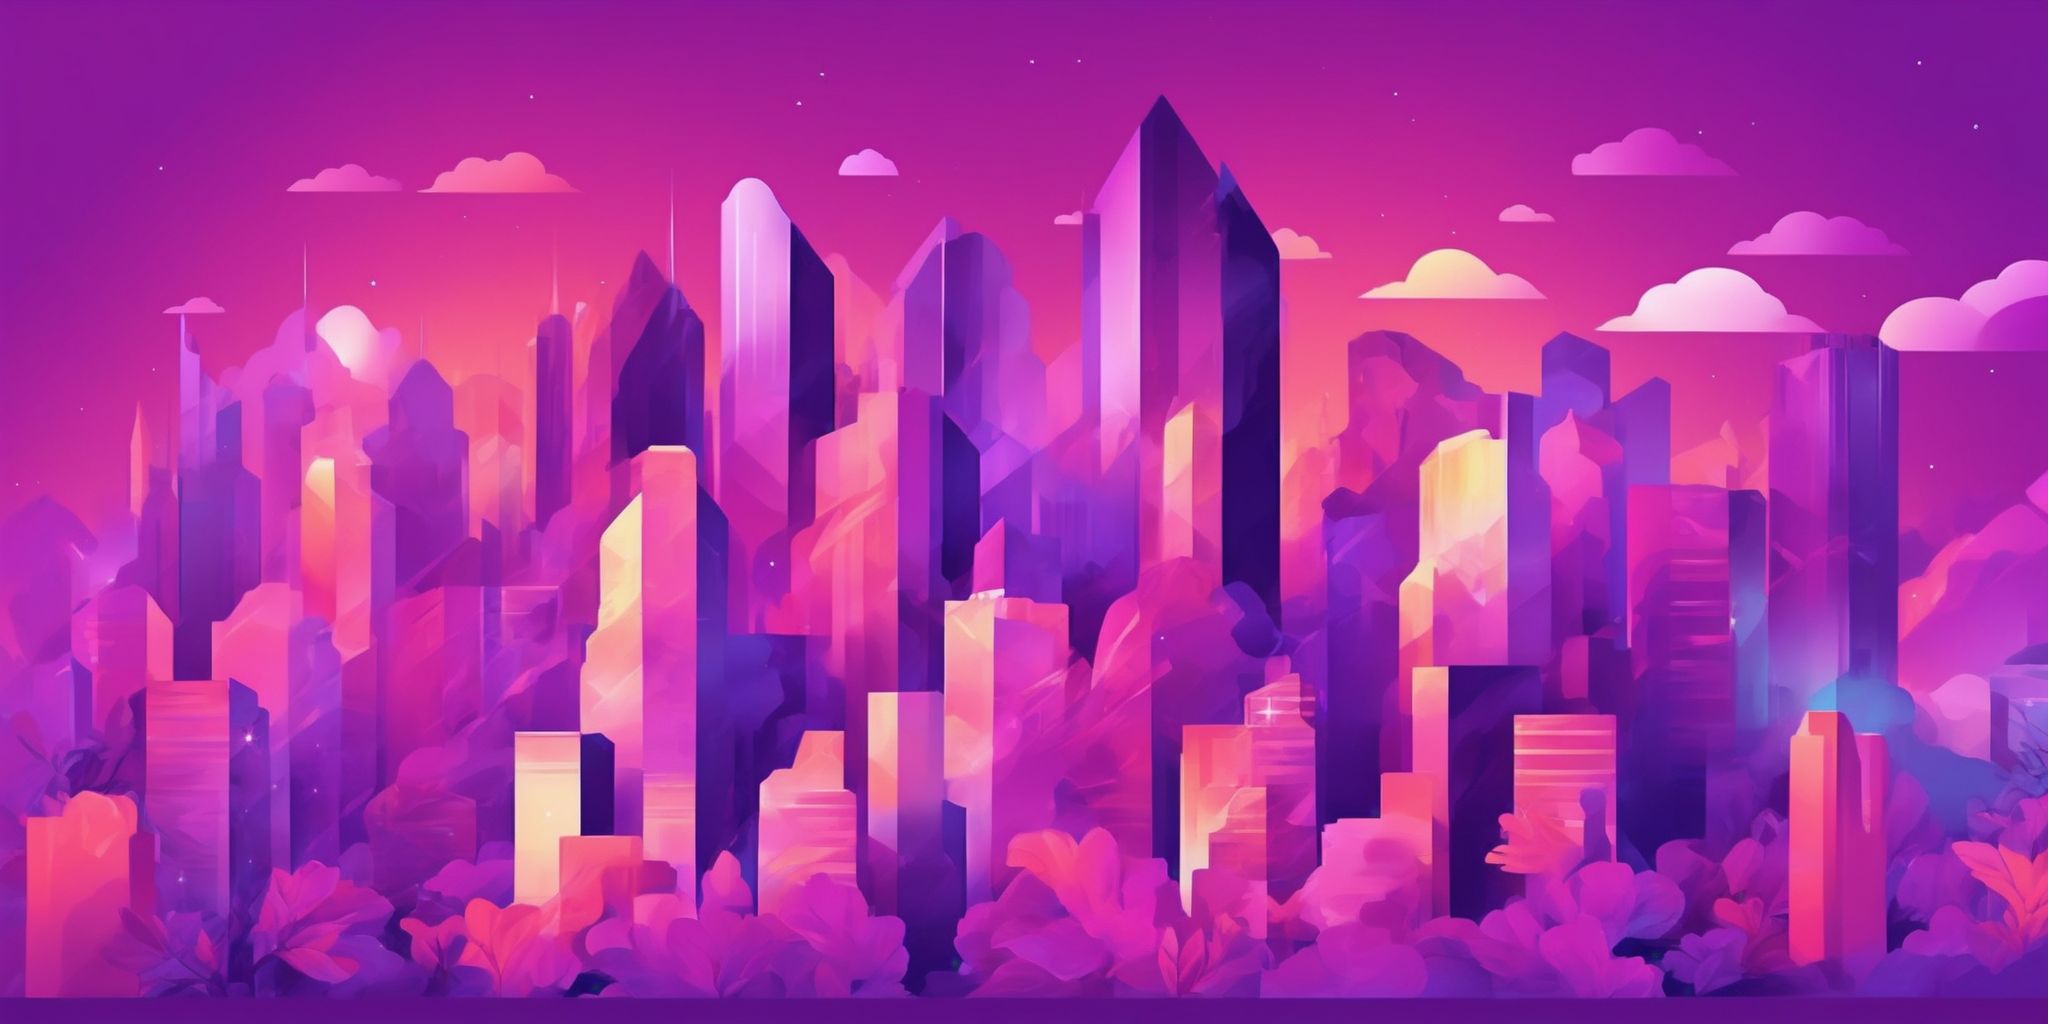 Credited expertise in flat illustration style, colorful purple gradient colors